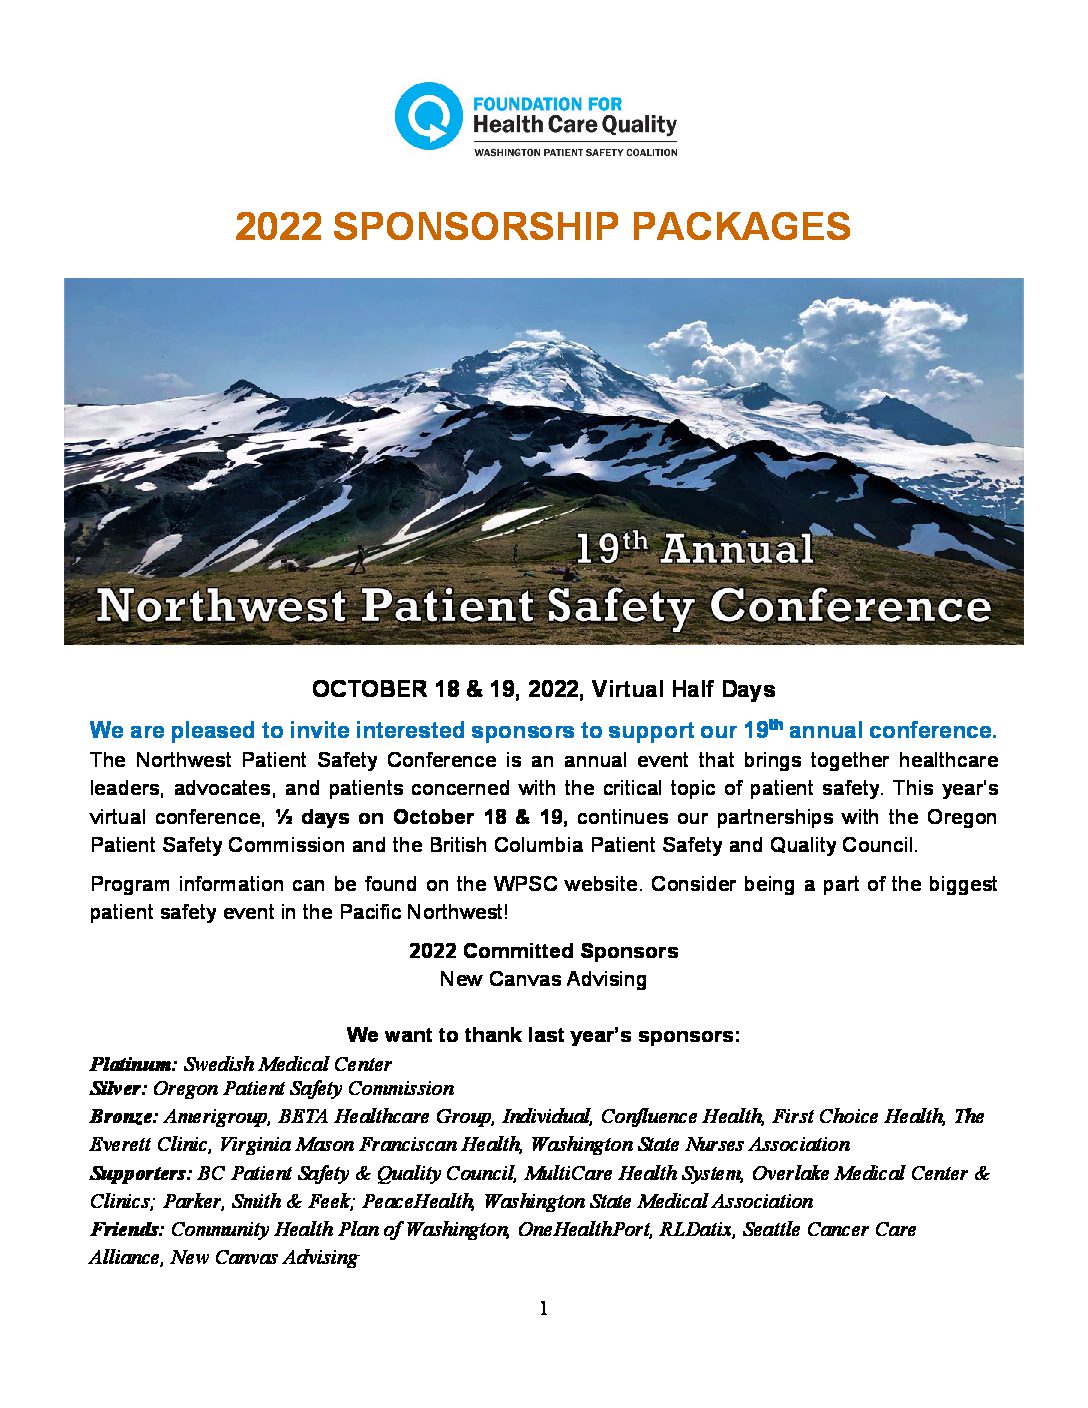 Sponsorship Packages 2022 NW Patient Safety Conference 2022_07_07